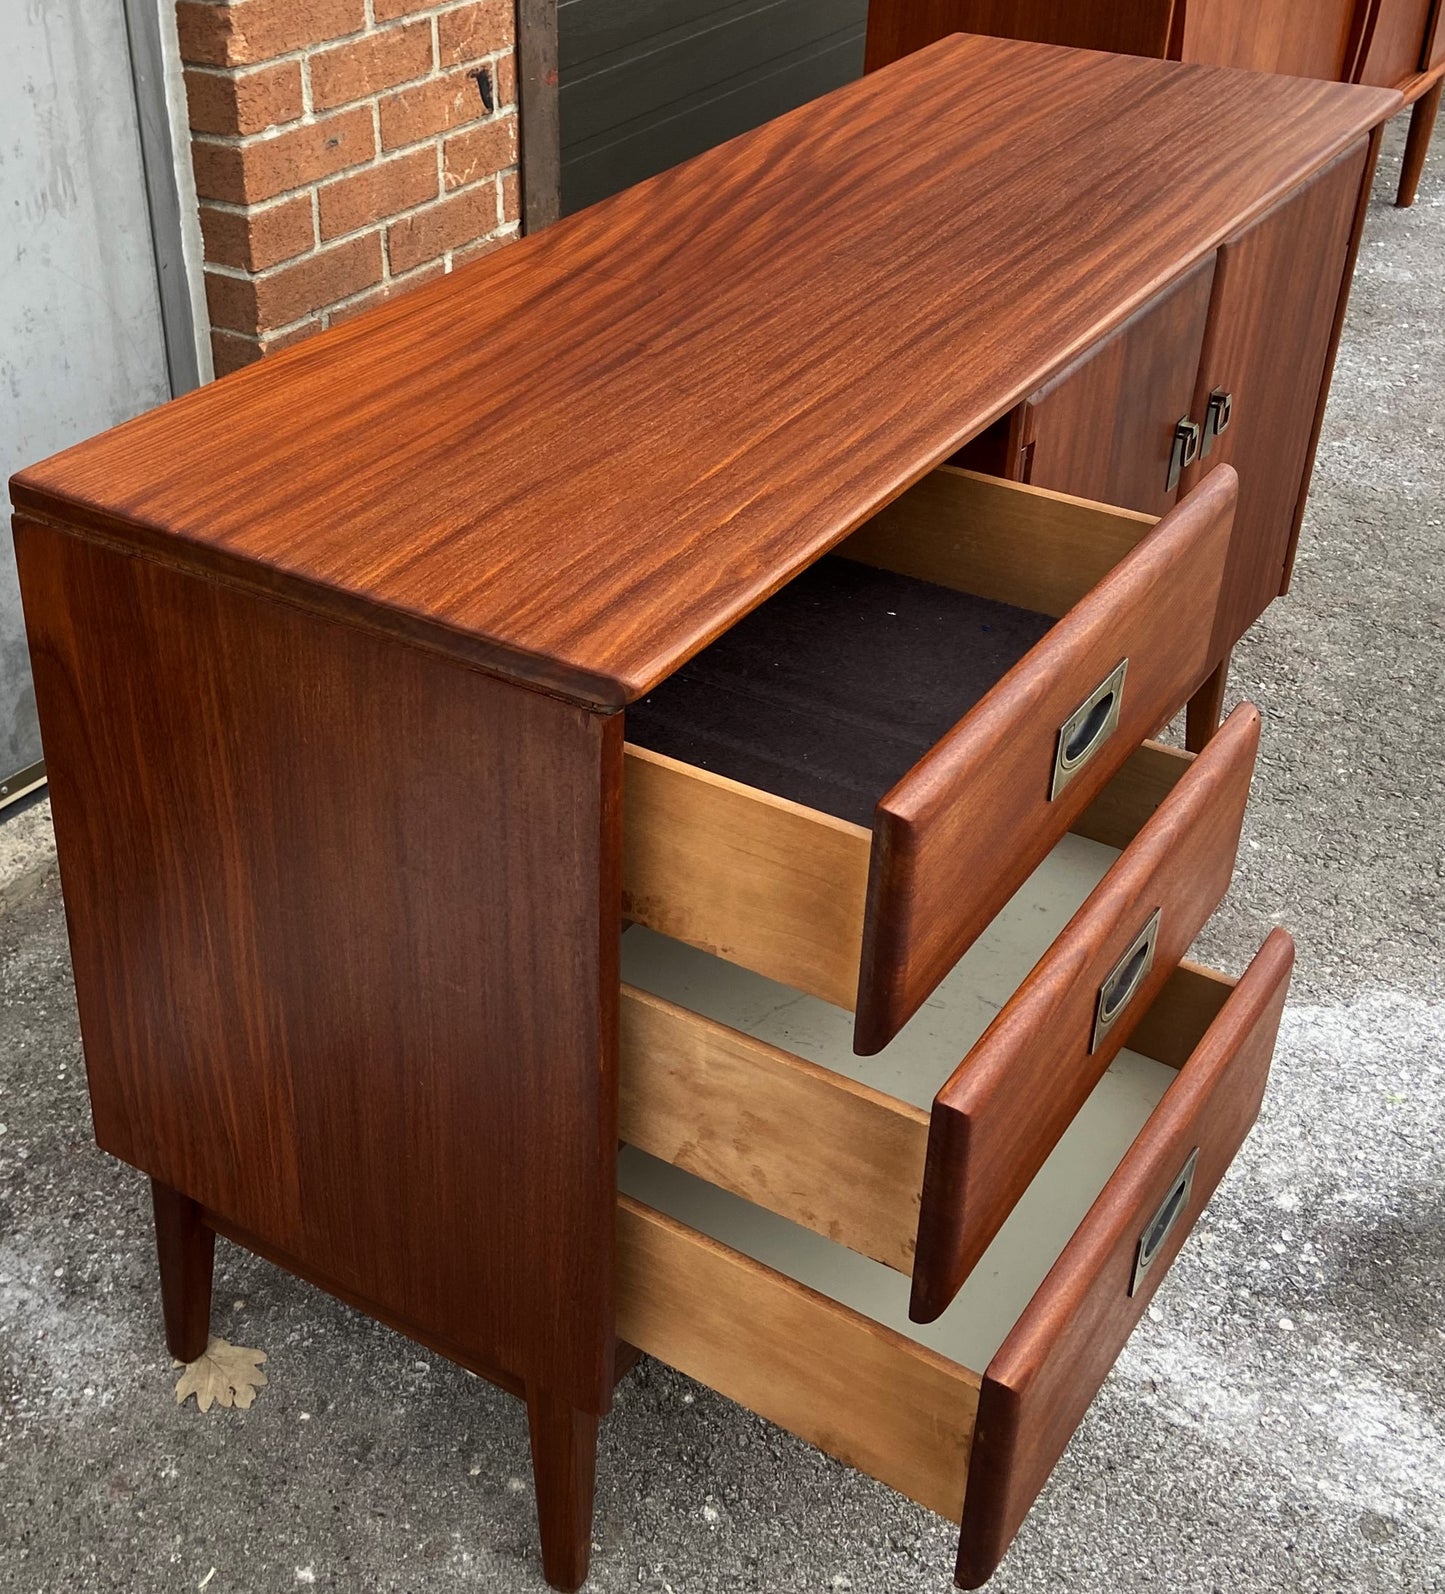 REFINISHED Mid Century Modern SOLID TEAK Buffet by Imperial 54", PERFECT